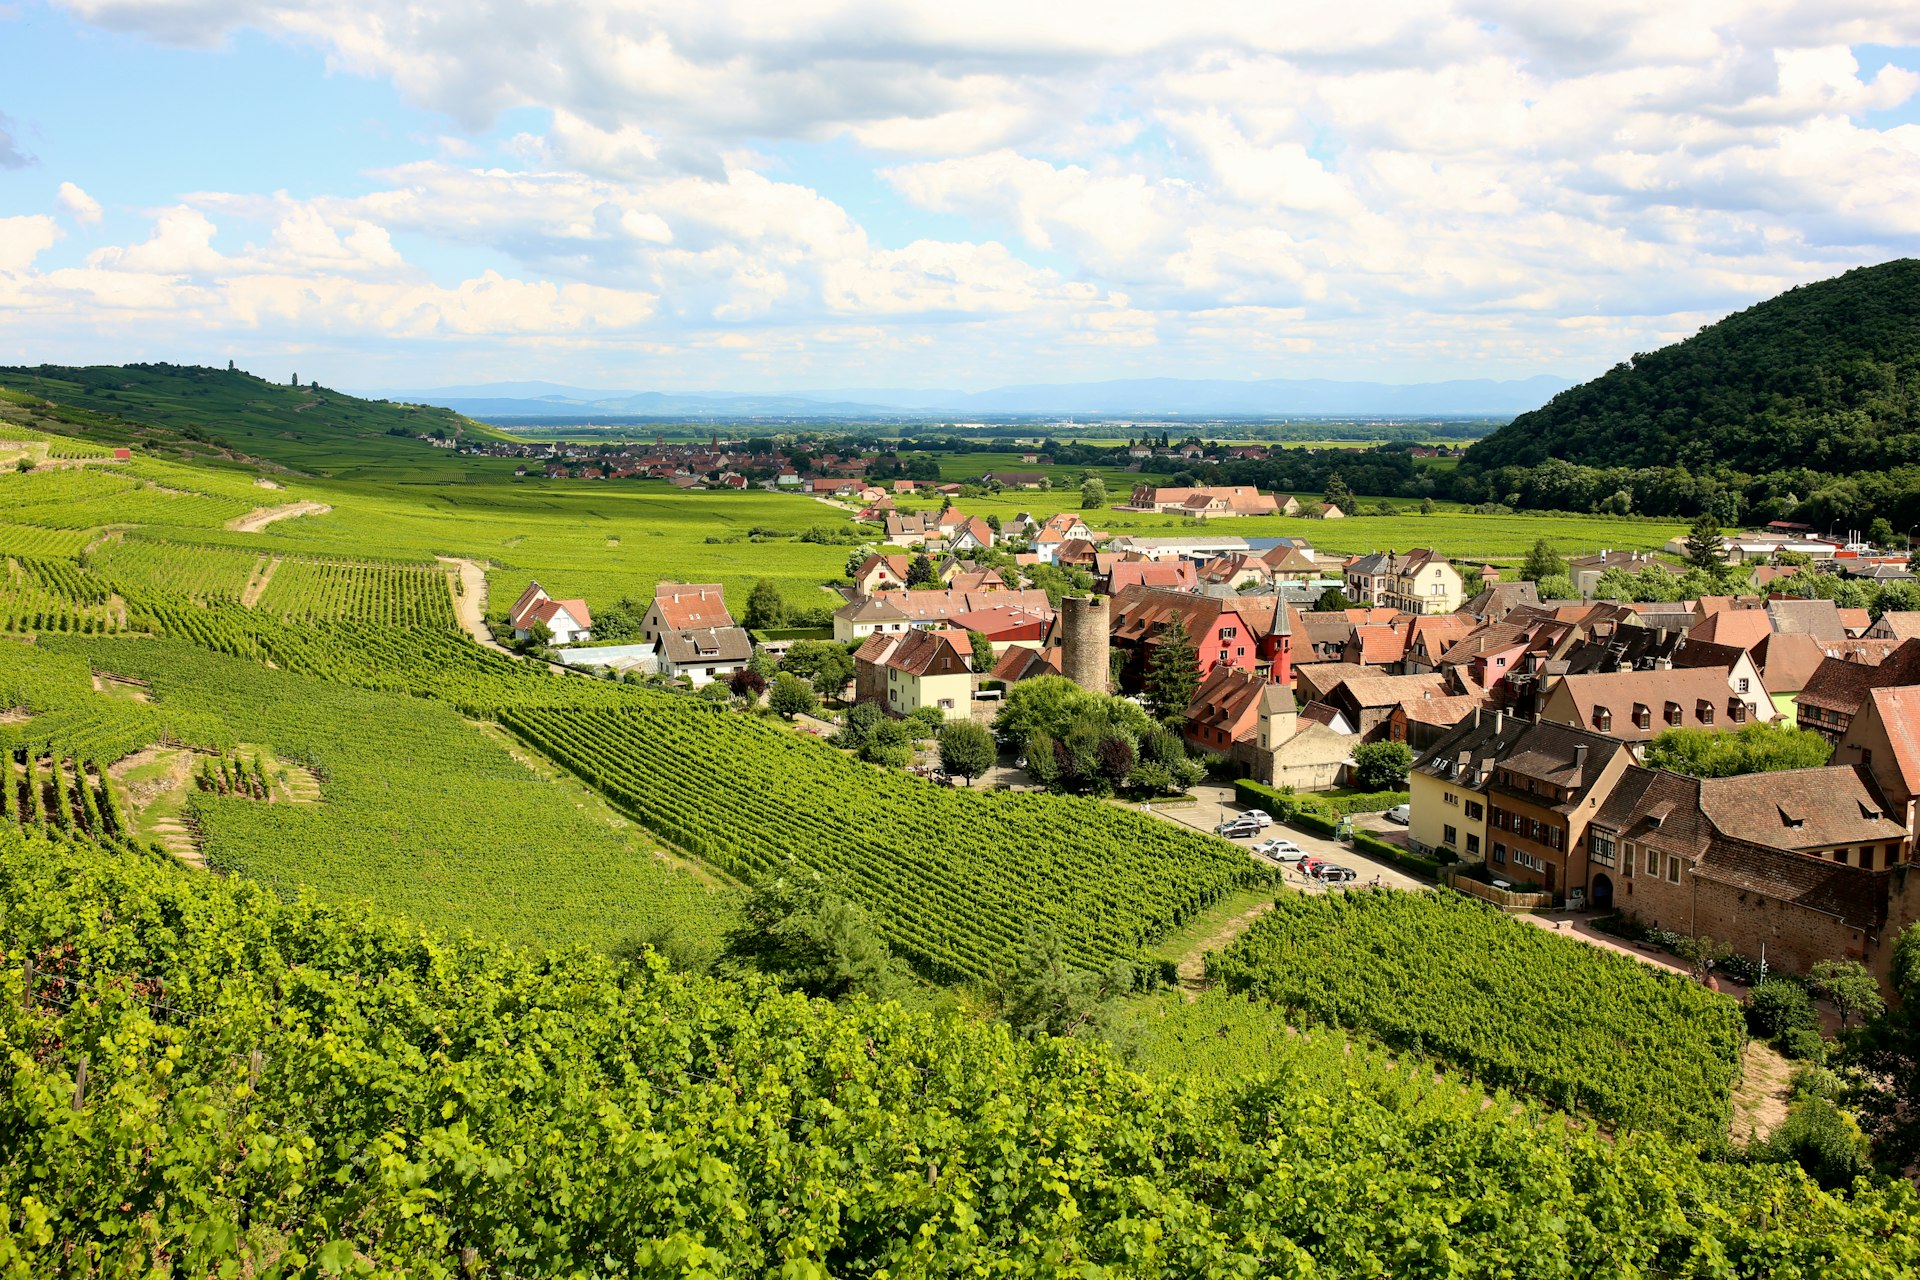 A village surrounded by vineyards